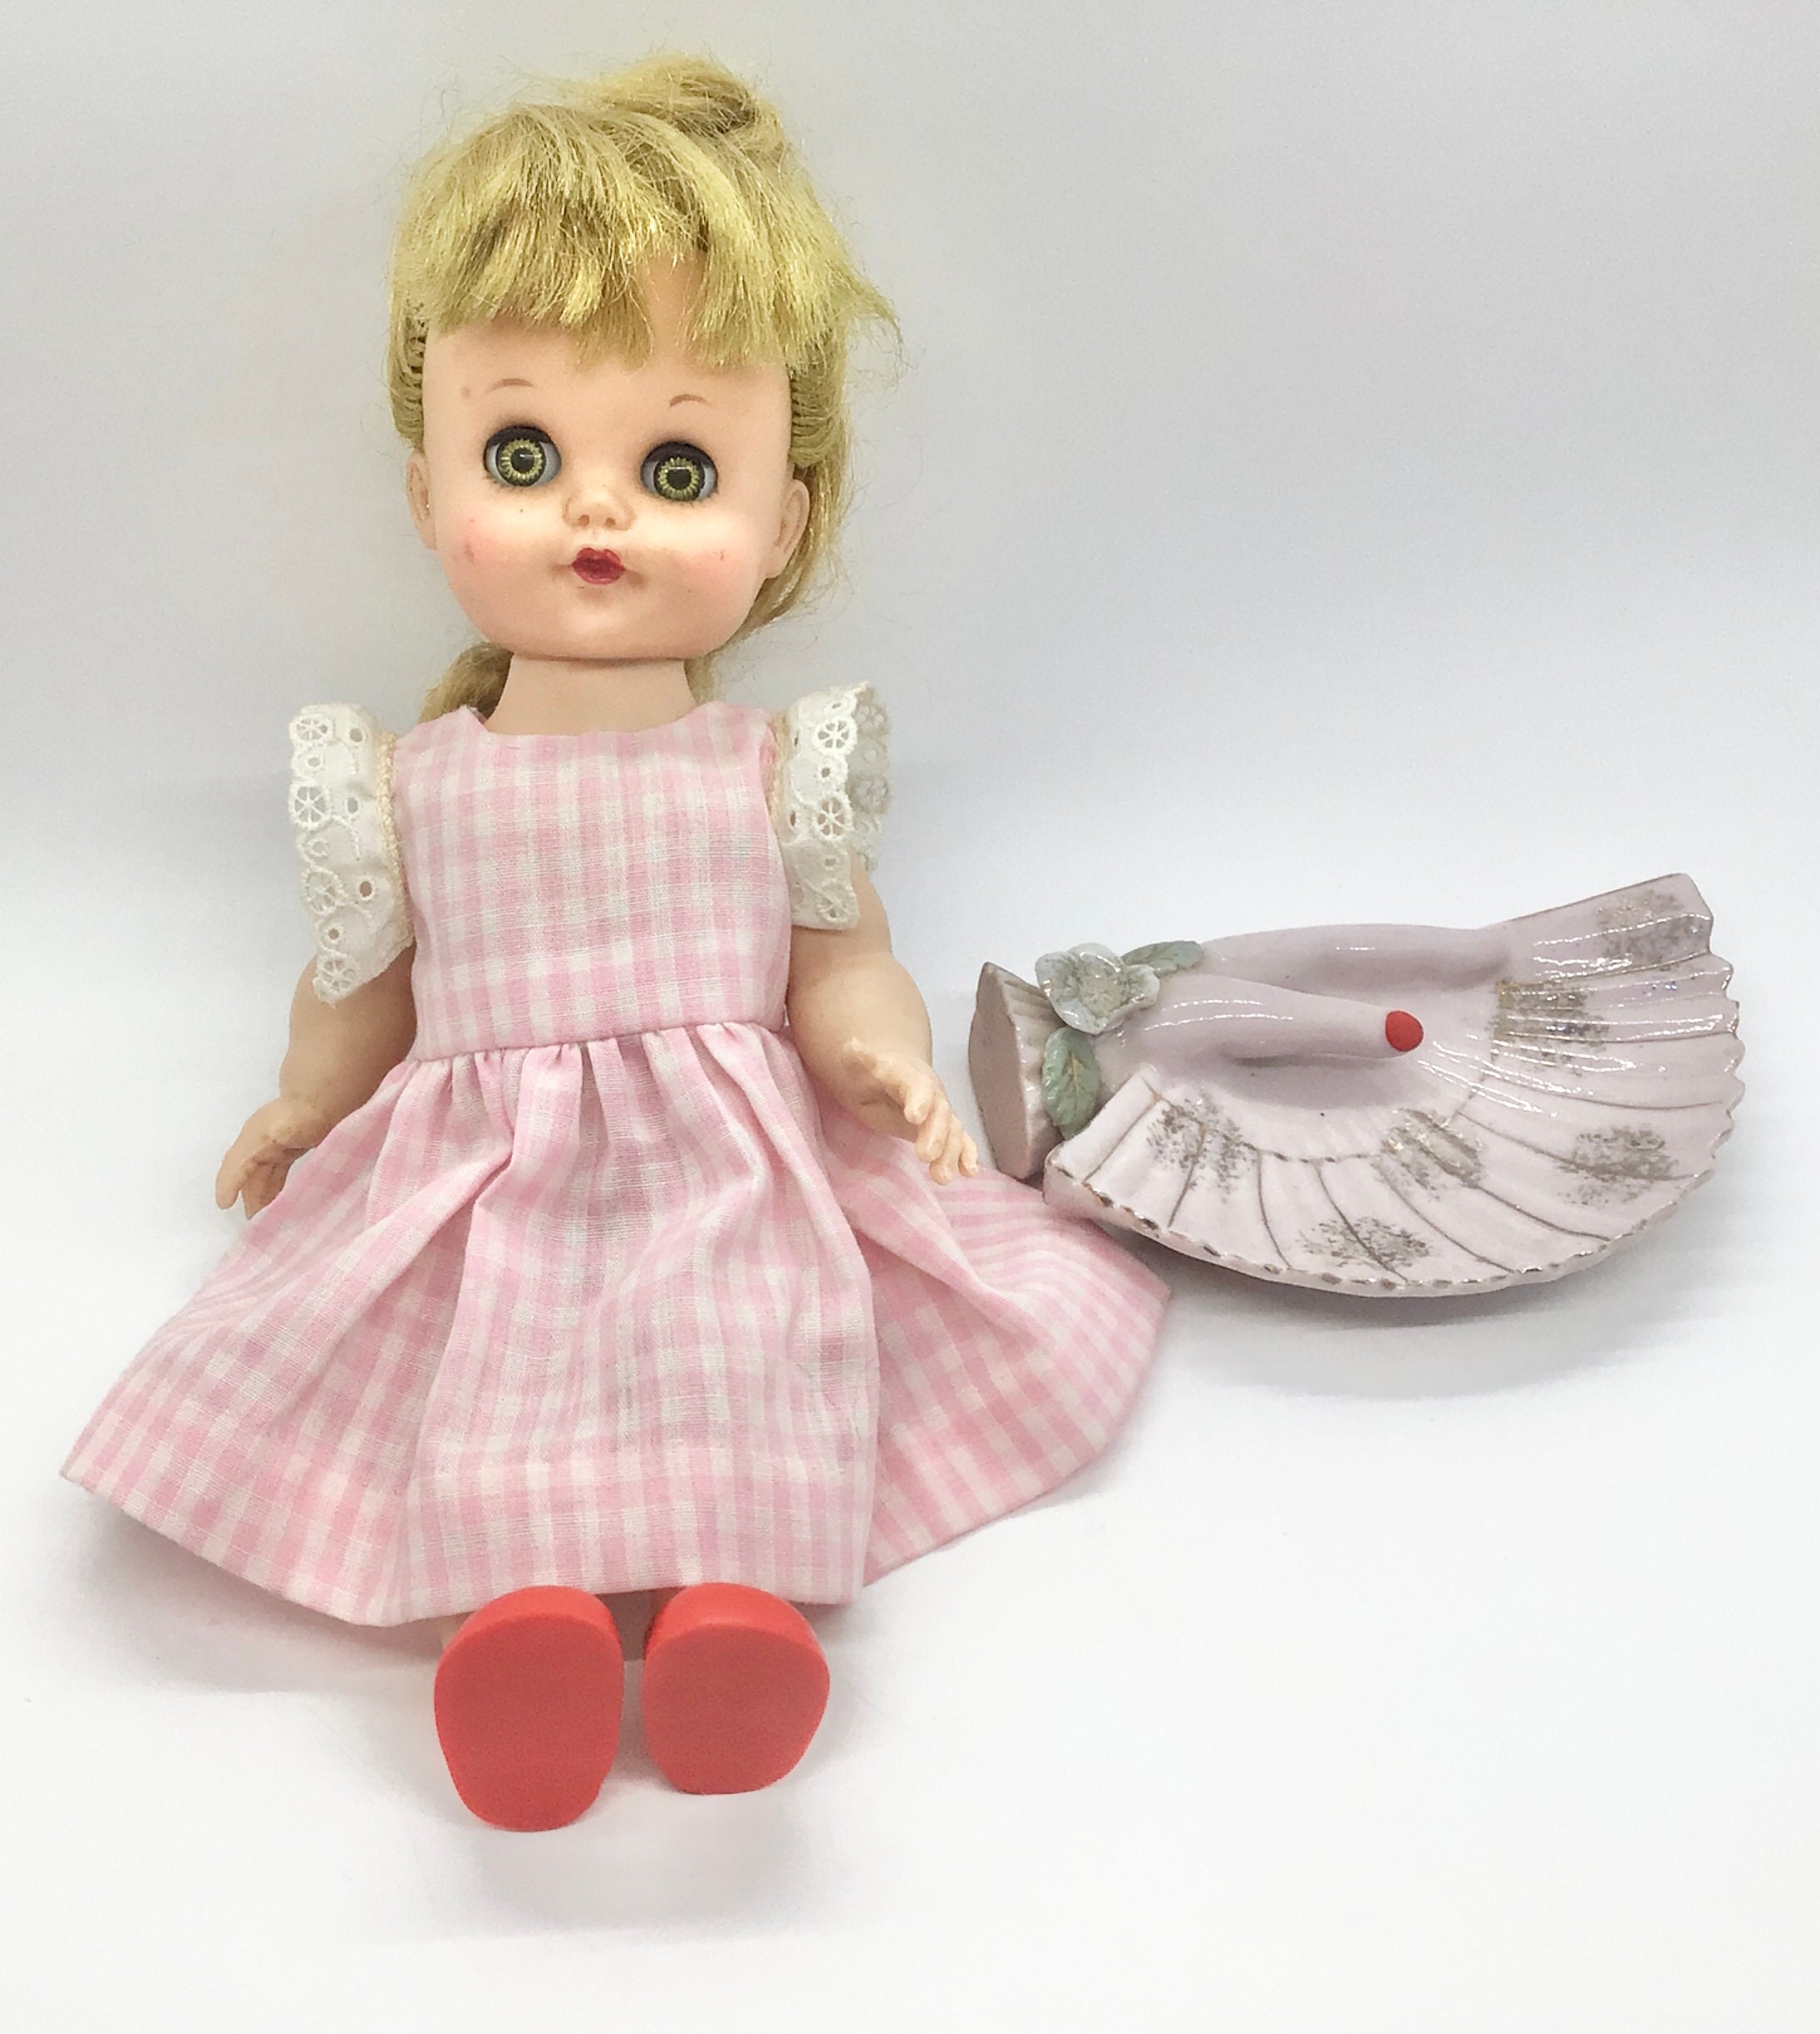 Vintage 1960s Eegee Doll Cute Pink Gingham Dress Red Shoes photo photo